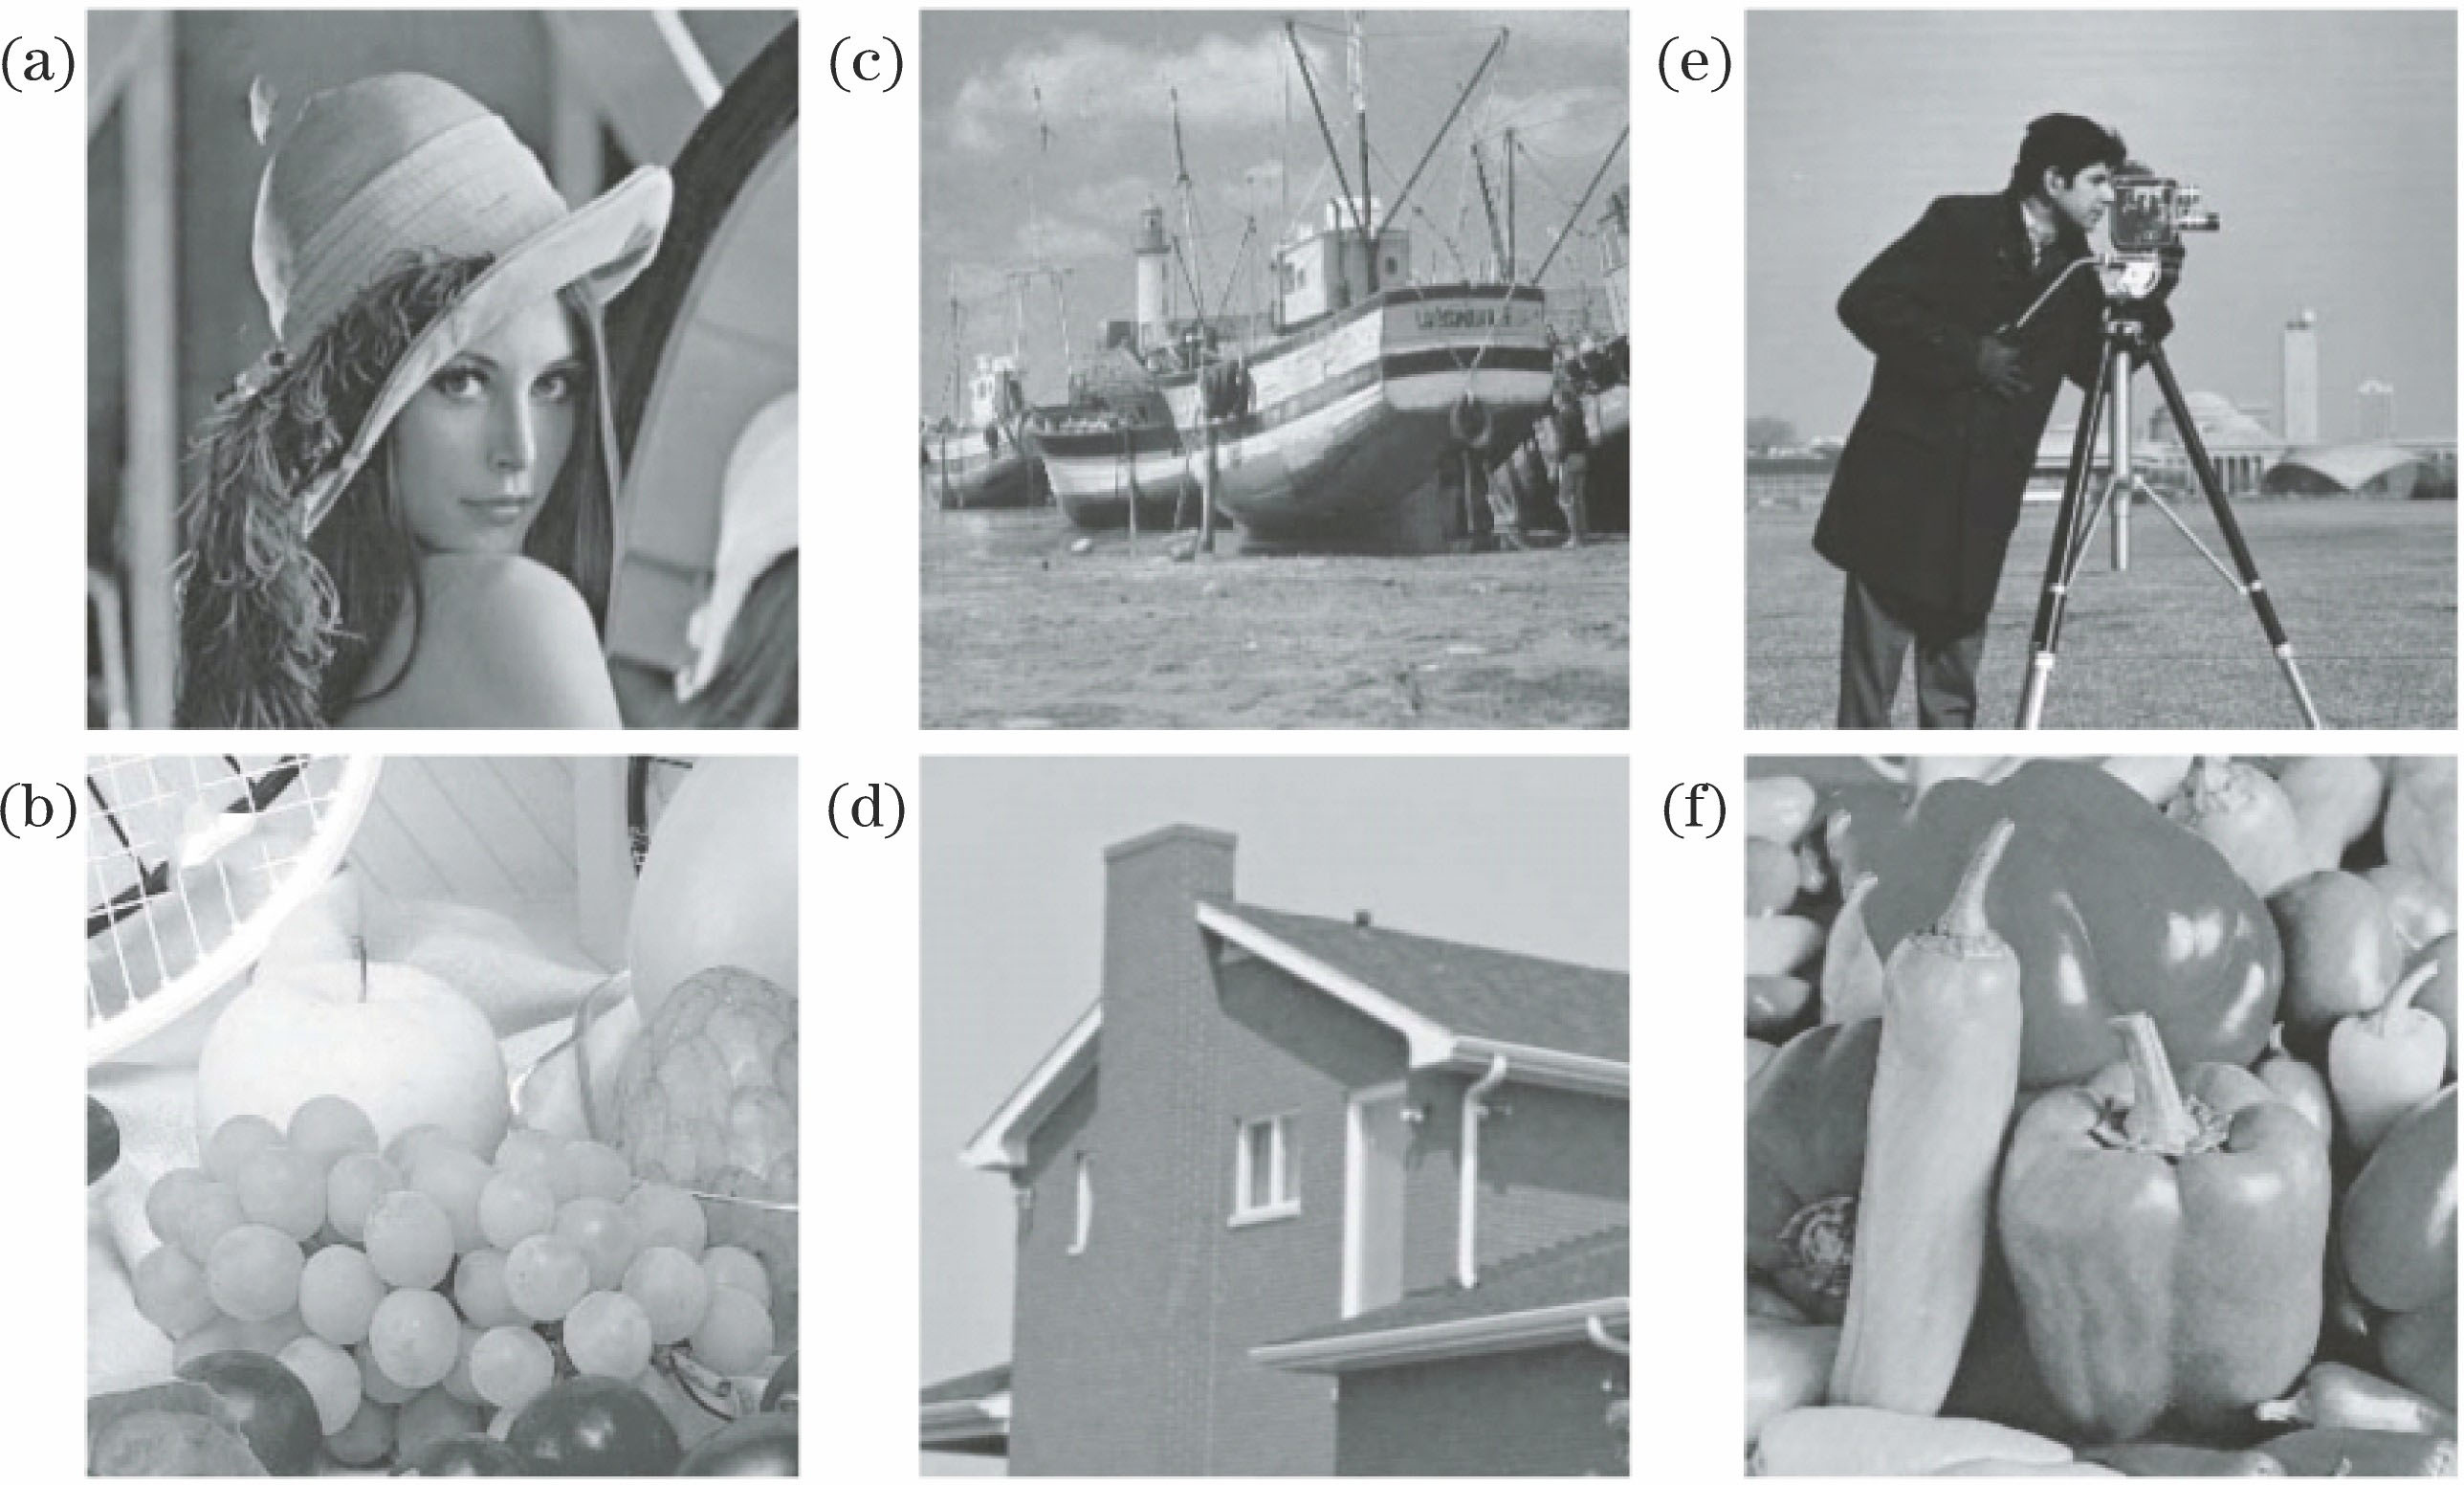 Some test images. (a) Lena; (b) Fruits; (c) Boat; (d) House; (e) Cameraman; (f) Peppers